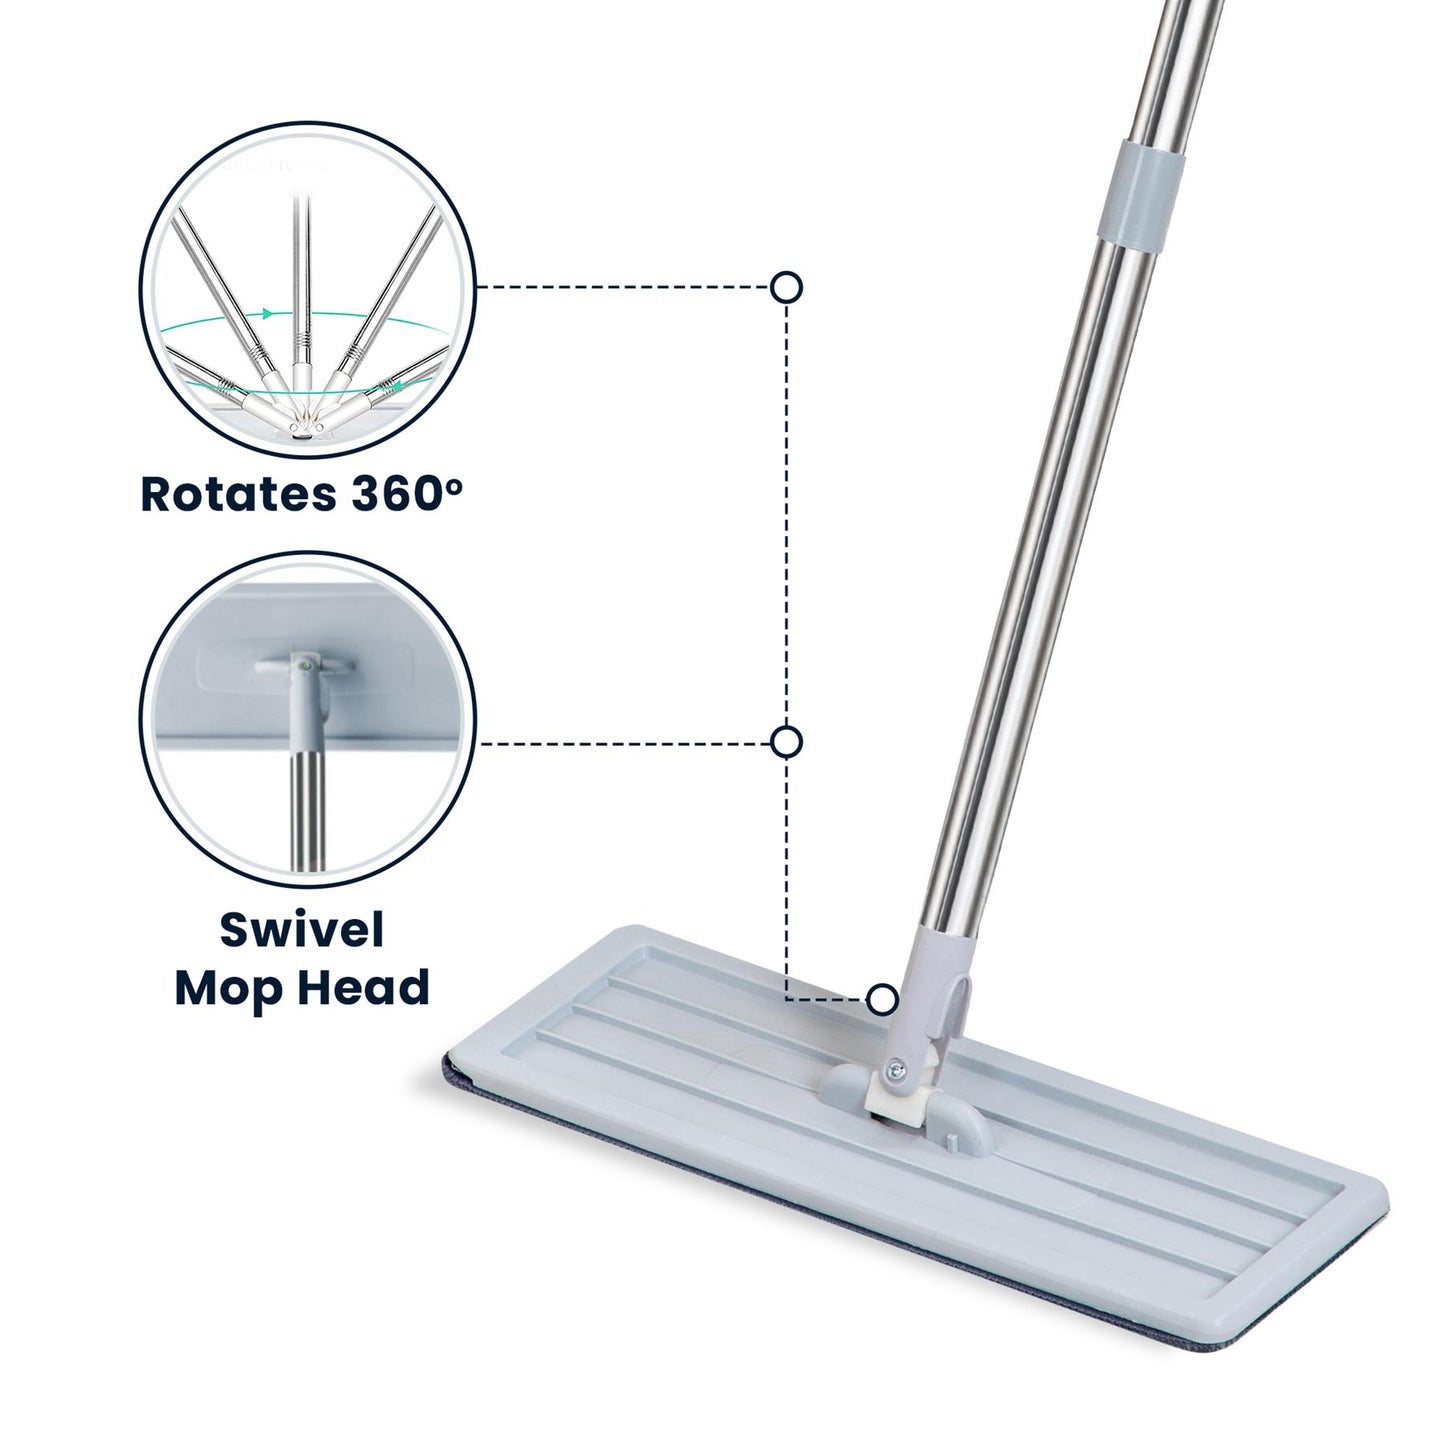 Keep Your Floors Clean with Flat Mop & Bucket 5L